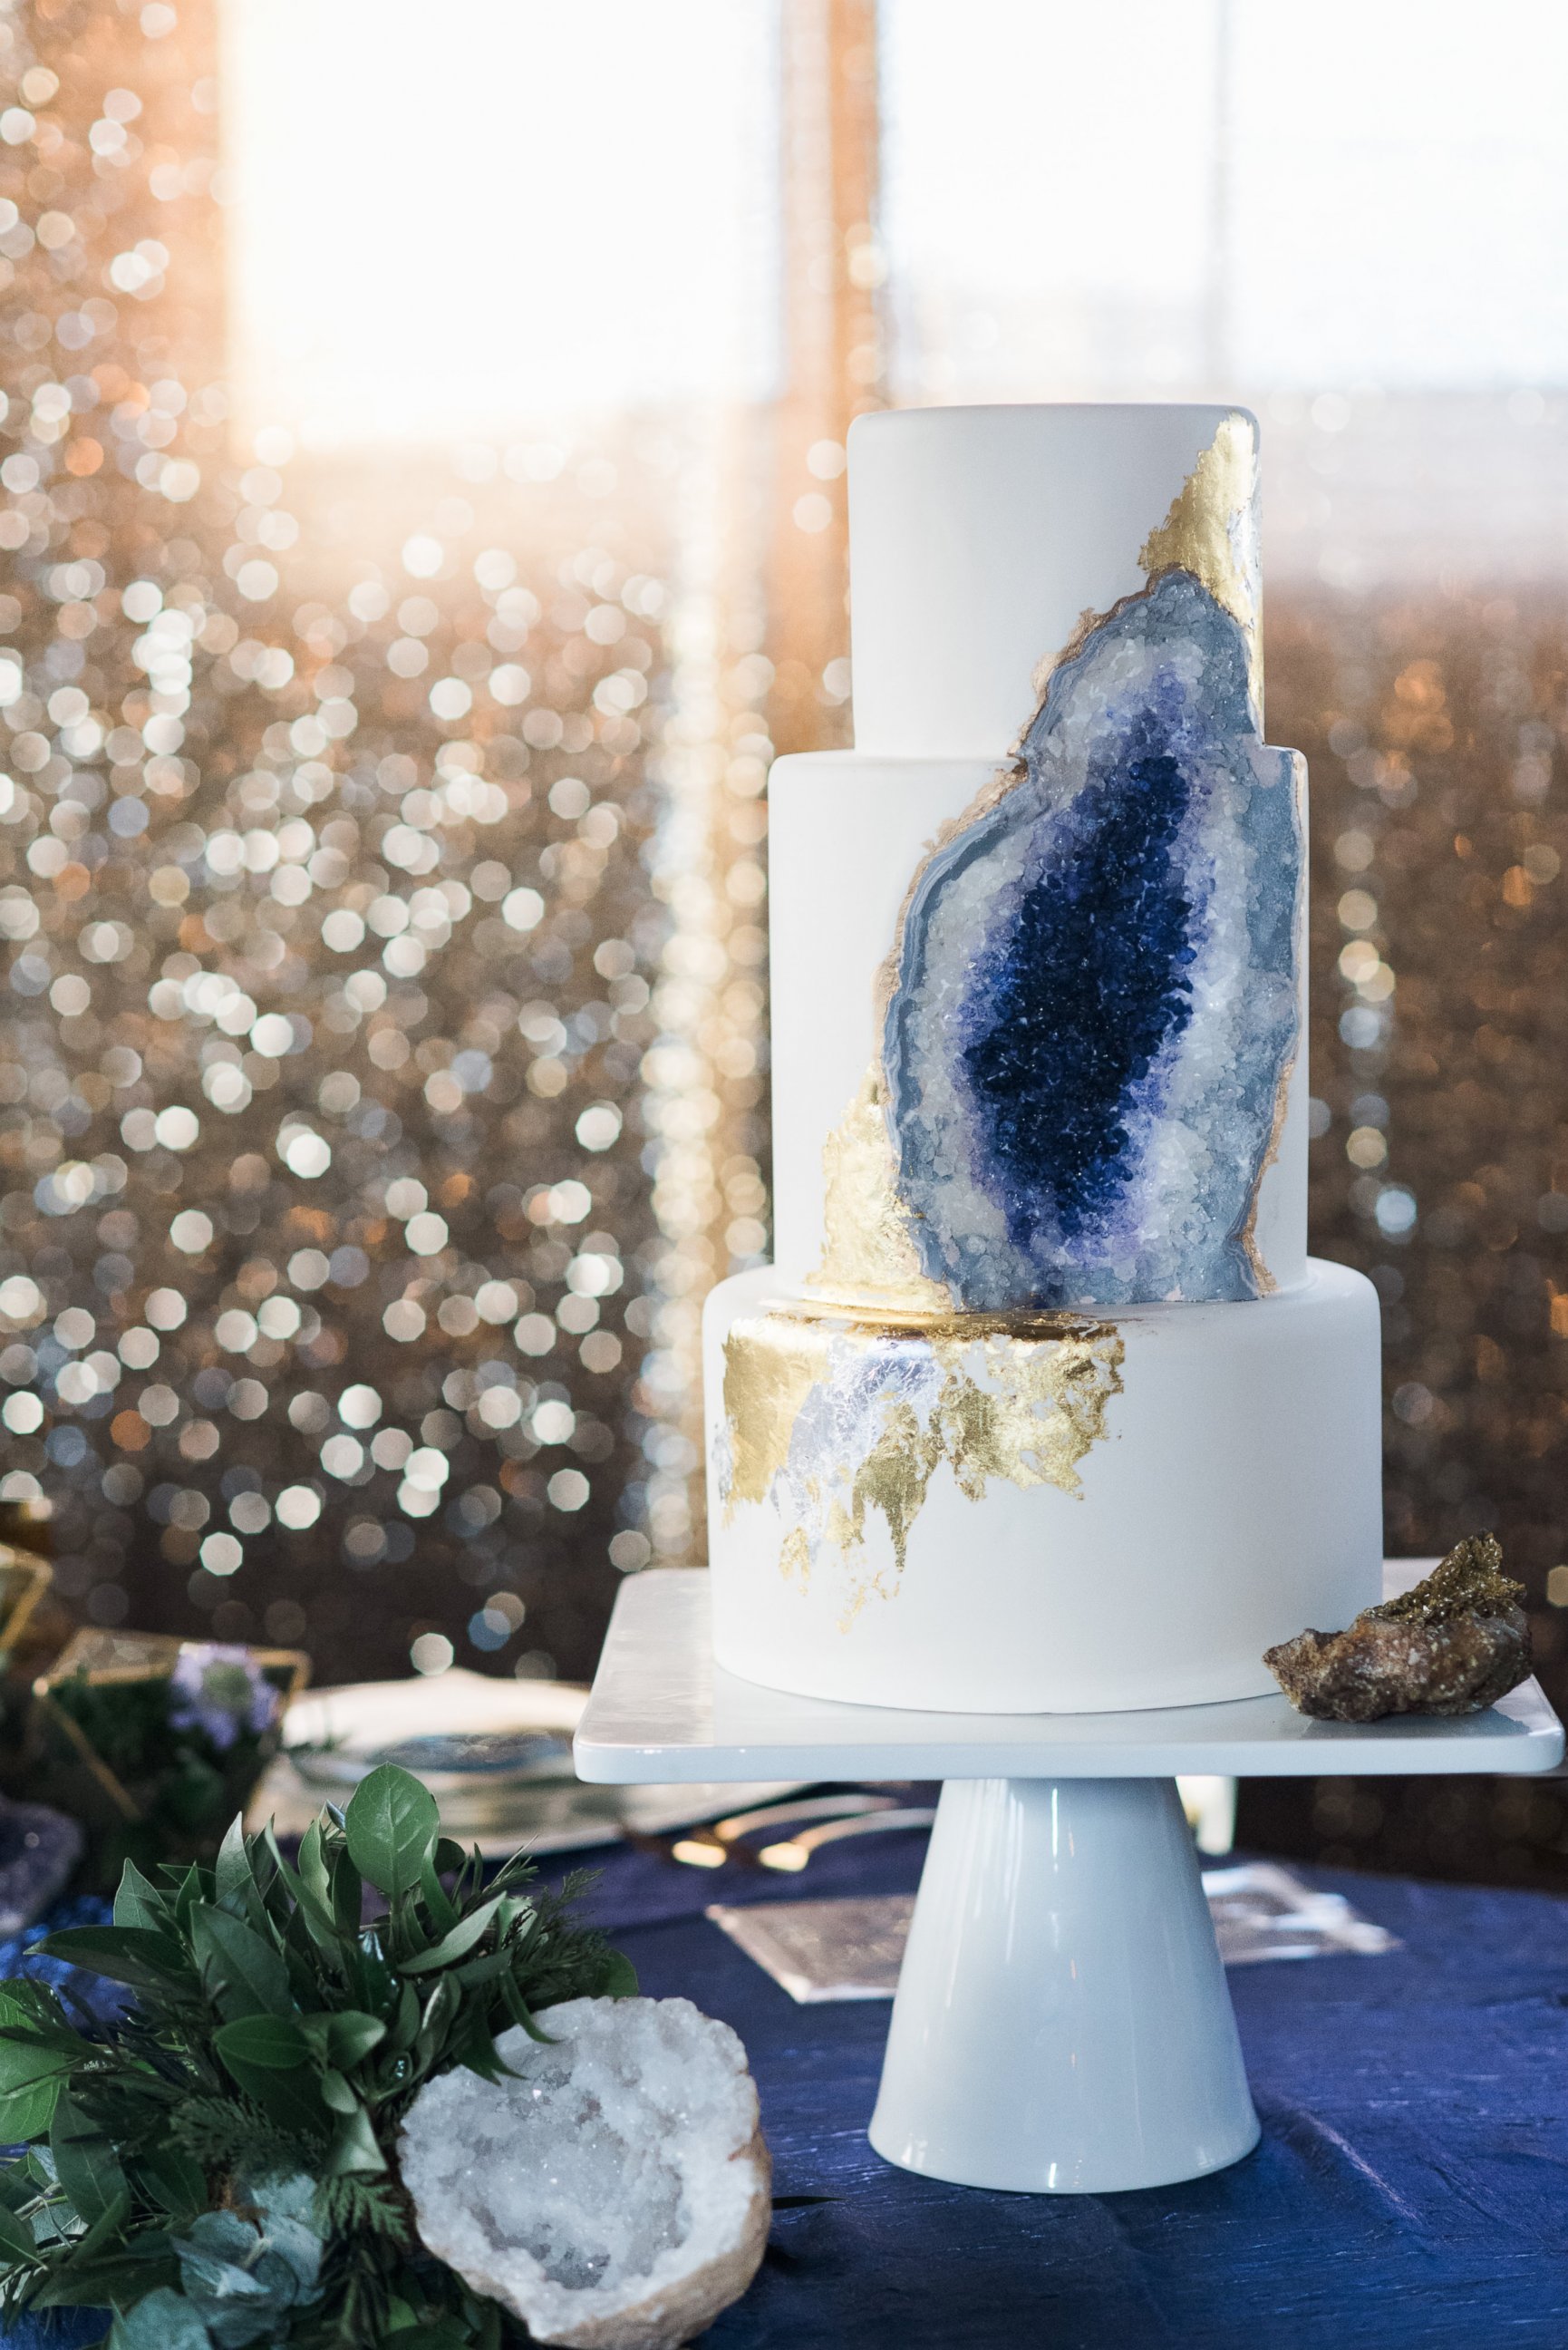 PHOTO: Rachael Teufel created this original large purple geode cake in January for an event in Denver, Colorado.